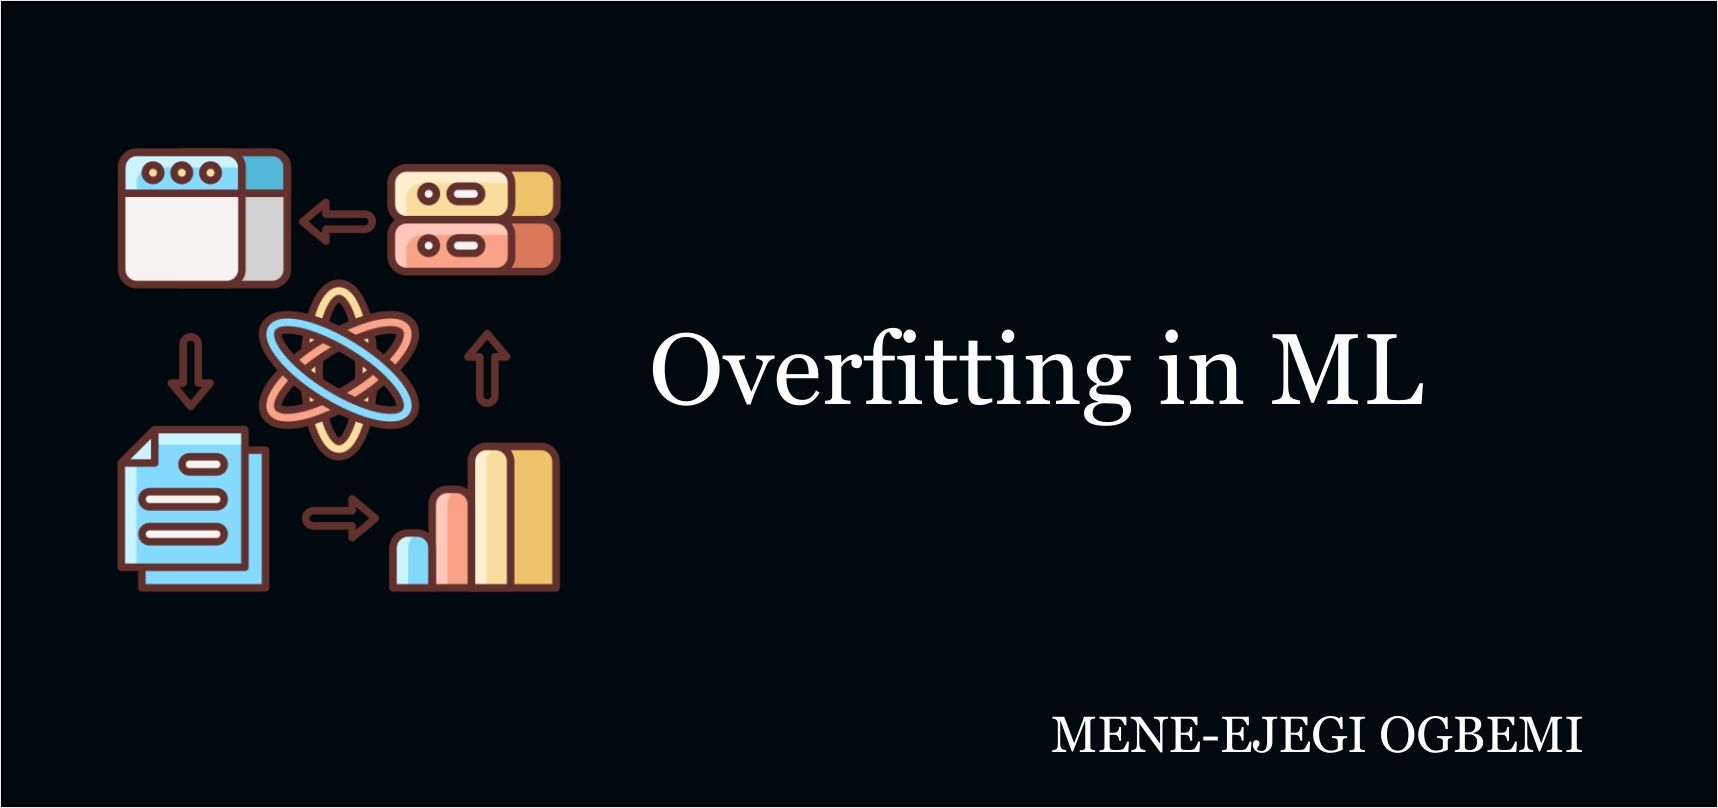 What is Overfitting in Machine Learning?